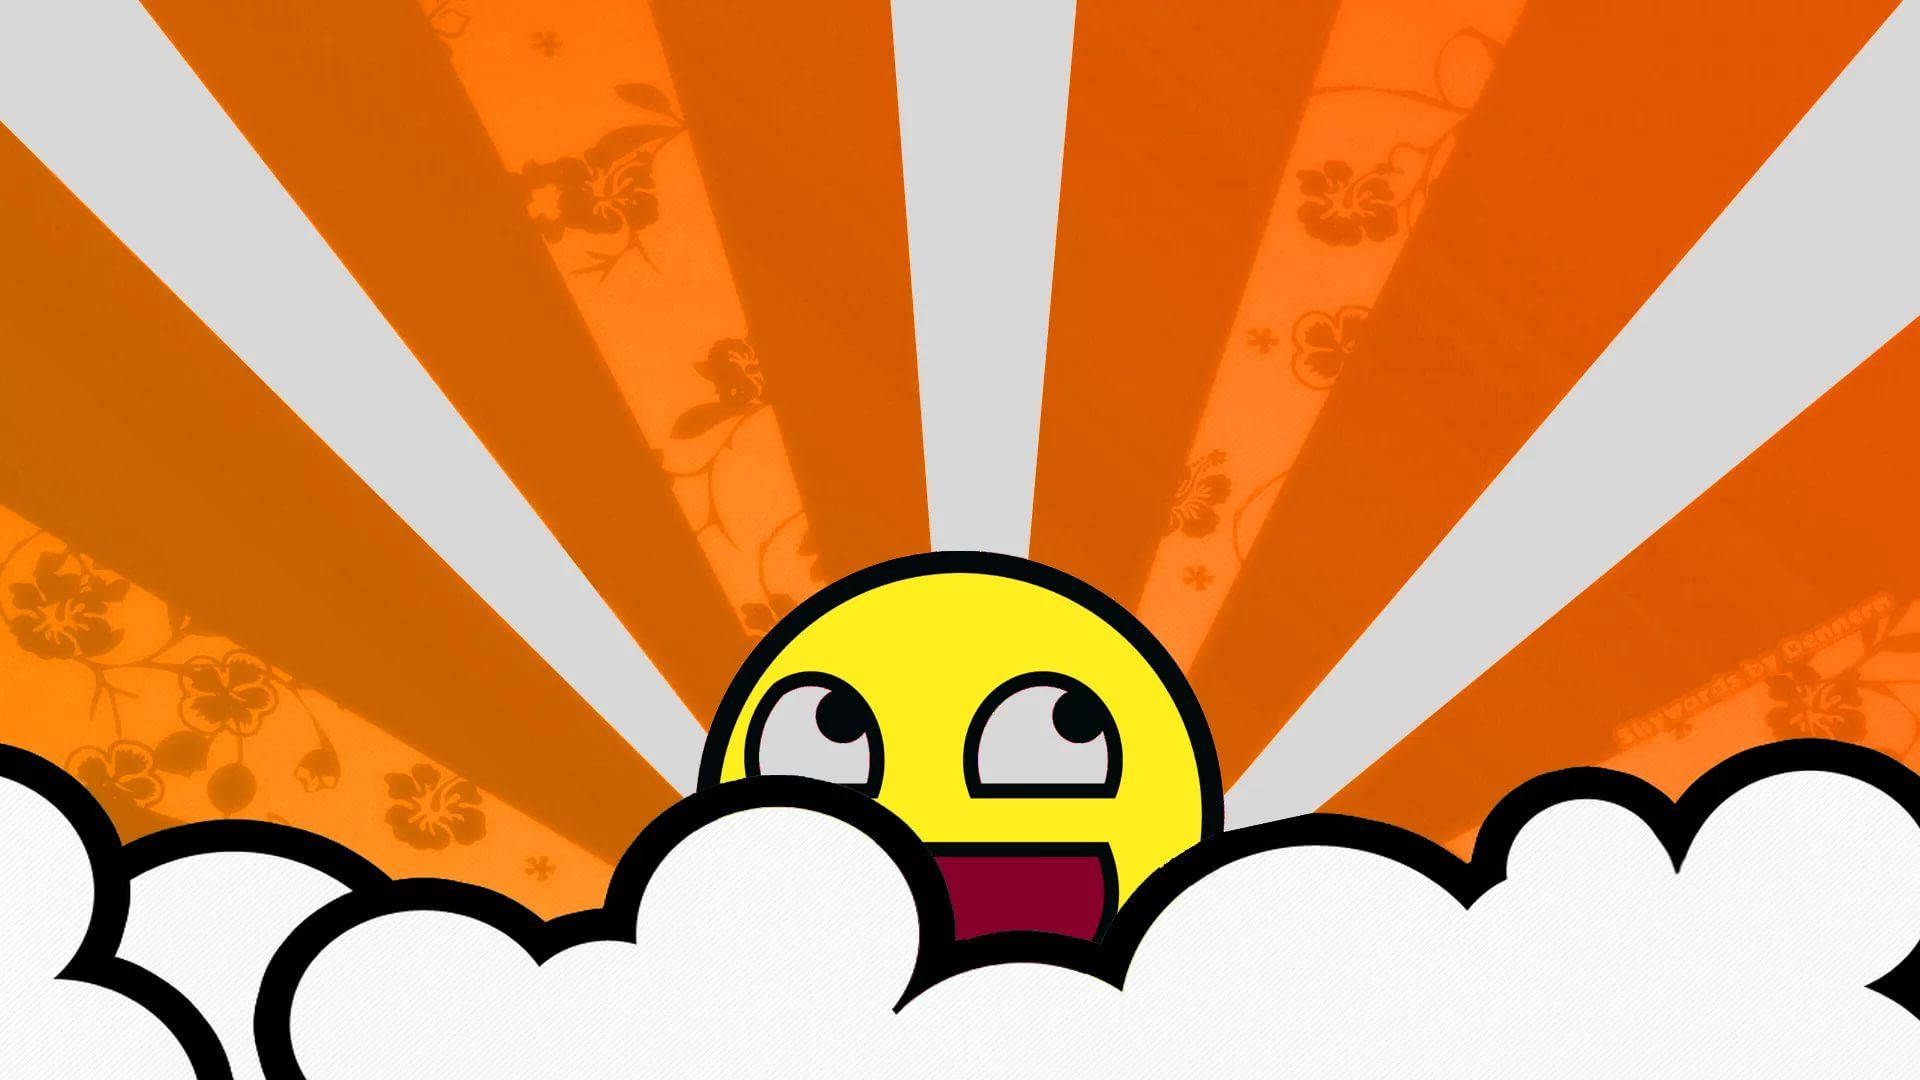 Yellow awesome smiley face showing happy expression and hiding behind the clouds, epic smiley meme.